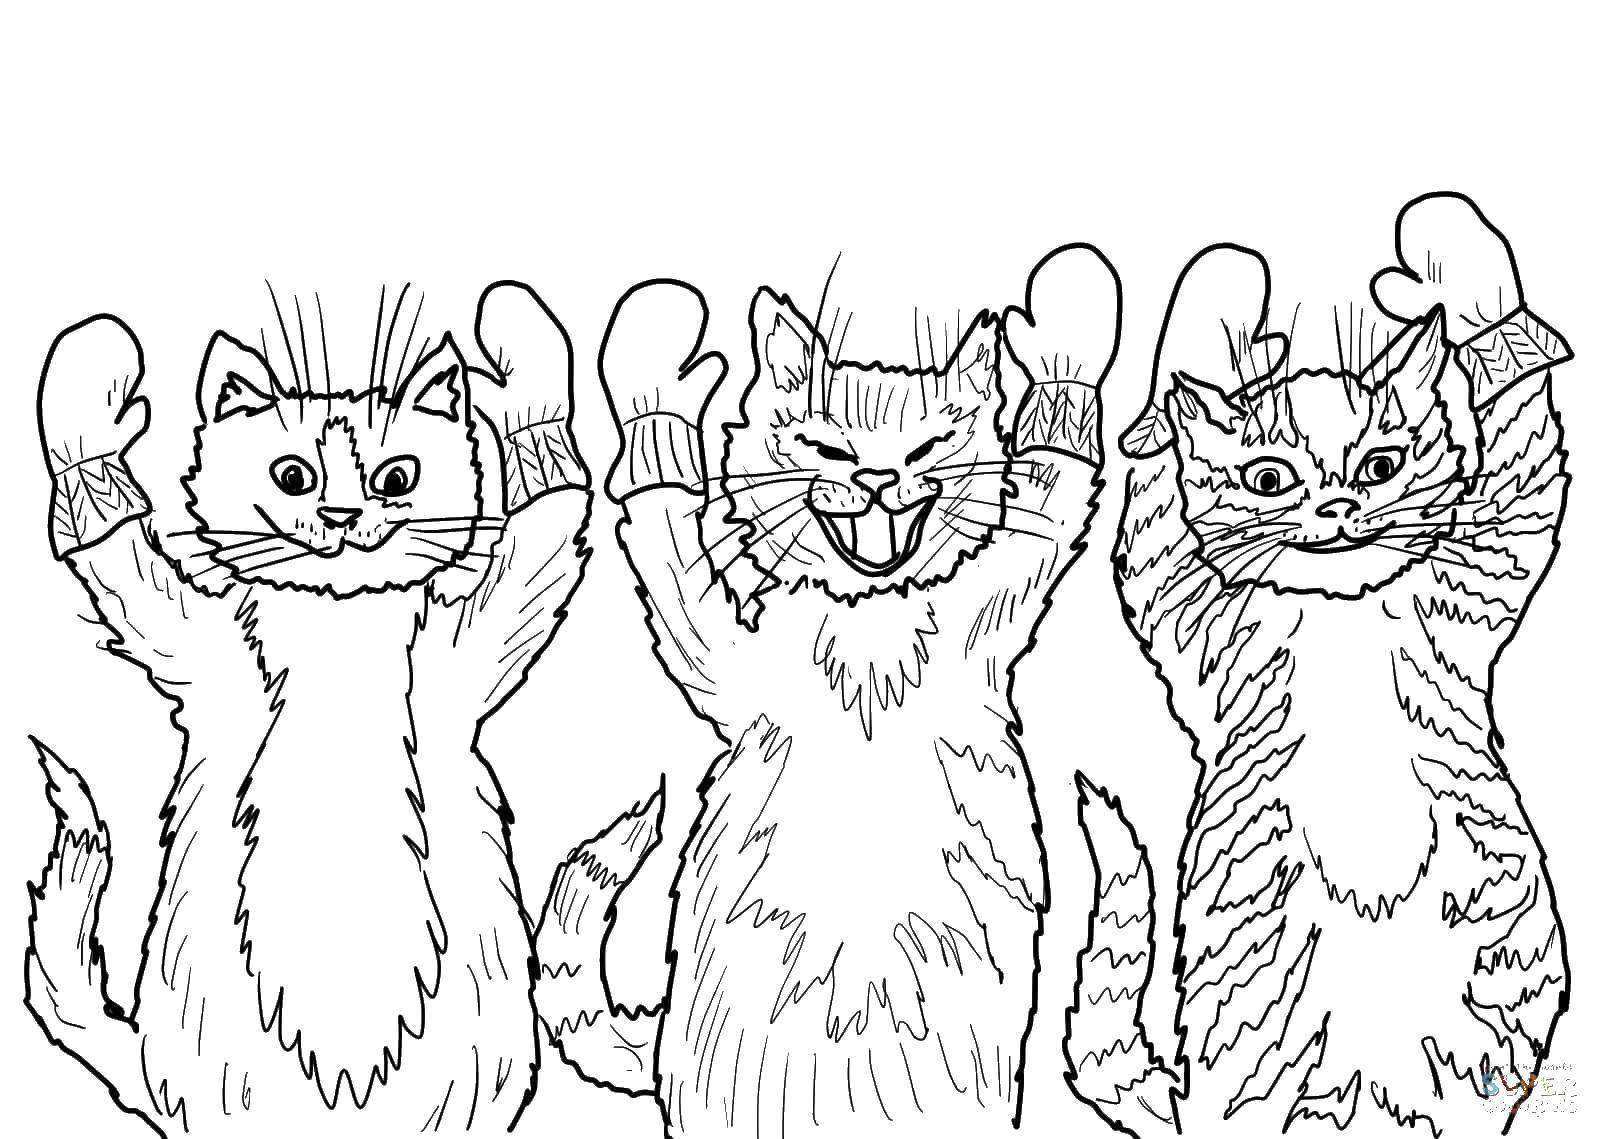 Online Coloring Pages Coloring Kittens In Mittens Coloring